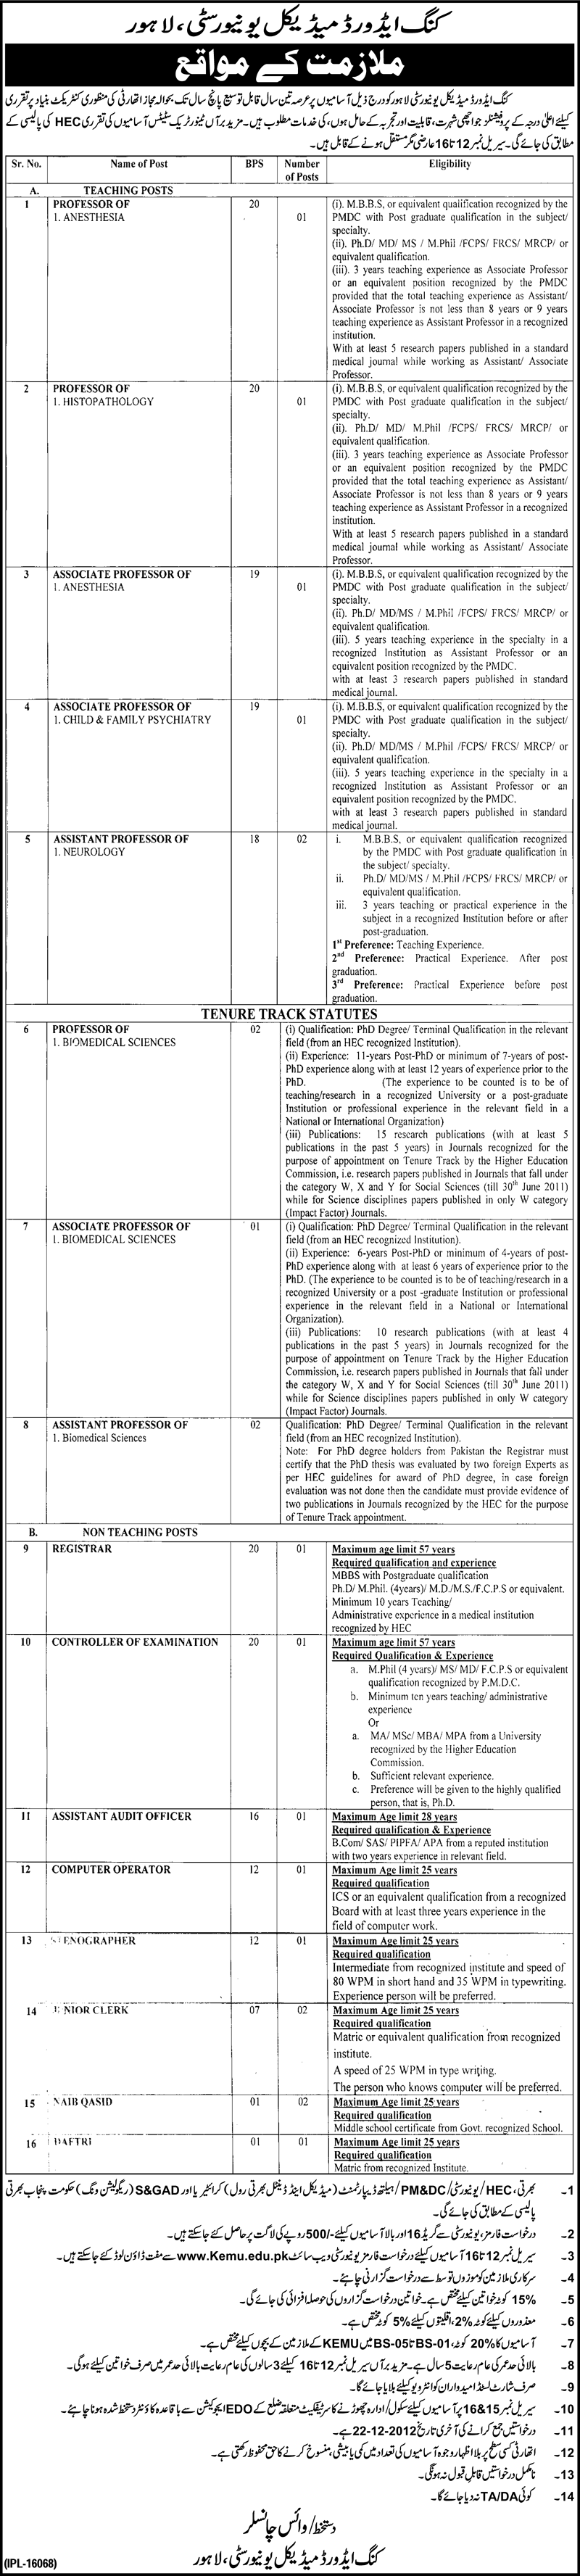 King Edward Medical University Lahore Jobs 2012 December for Faculty & Staff